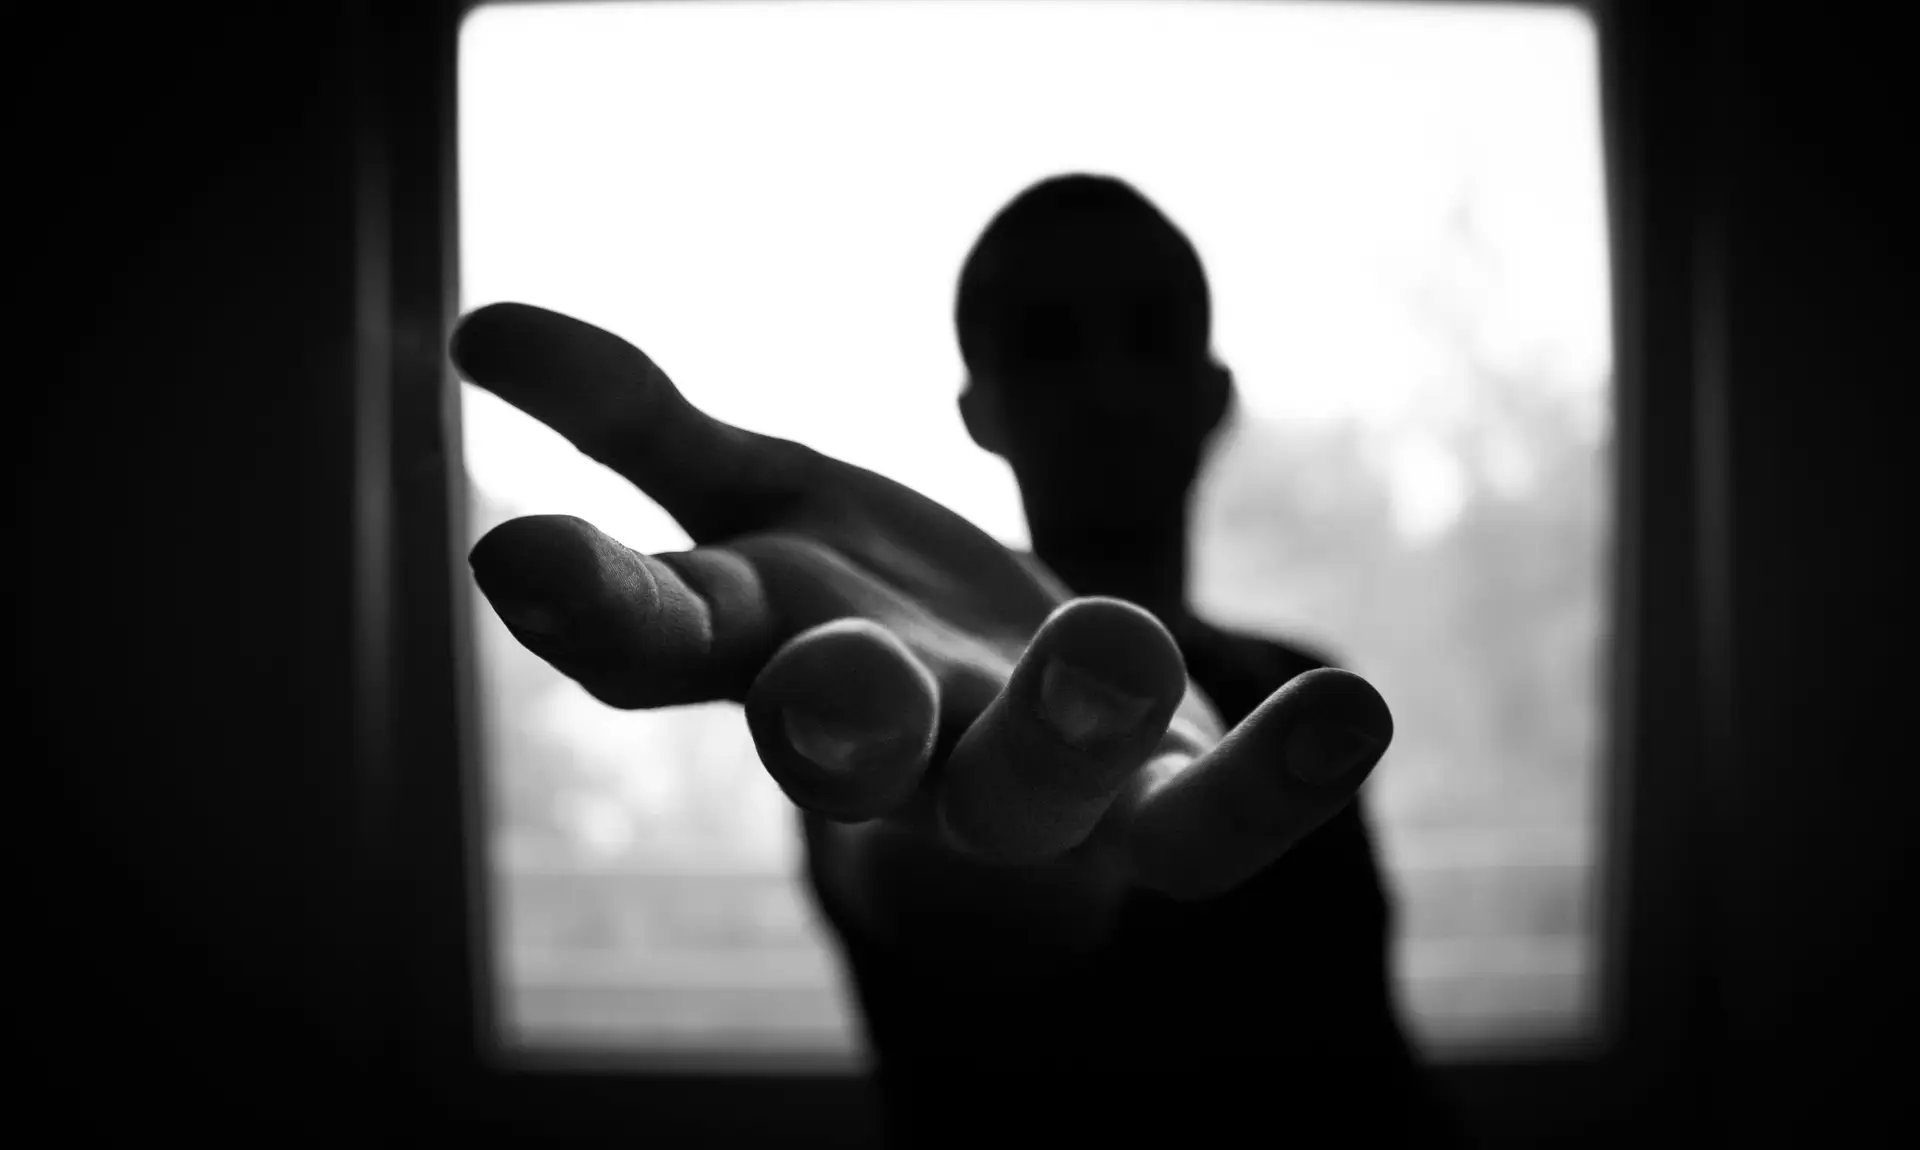 Silhouette of person holding their hand out, managing anxiety